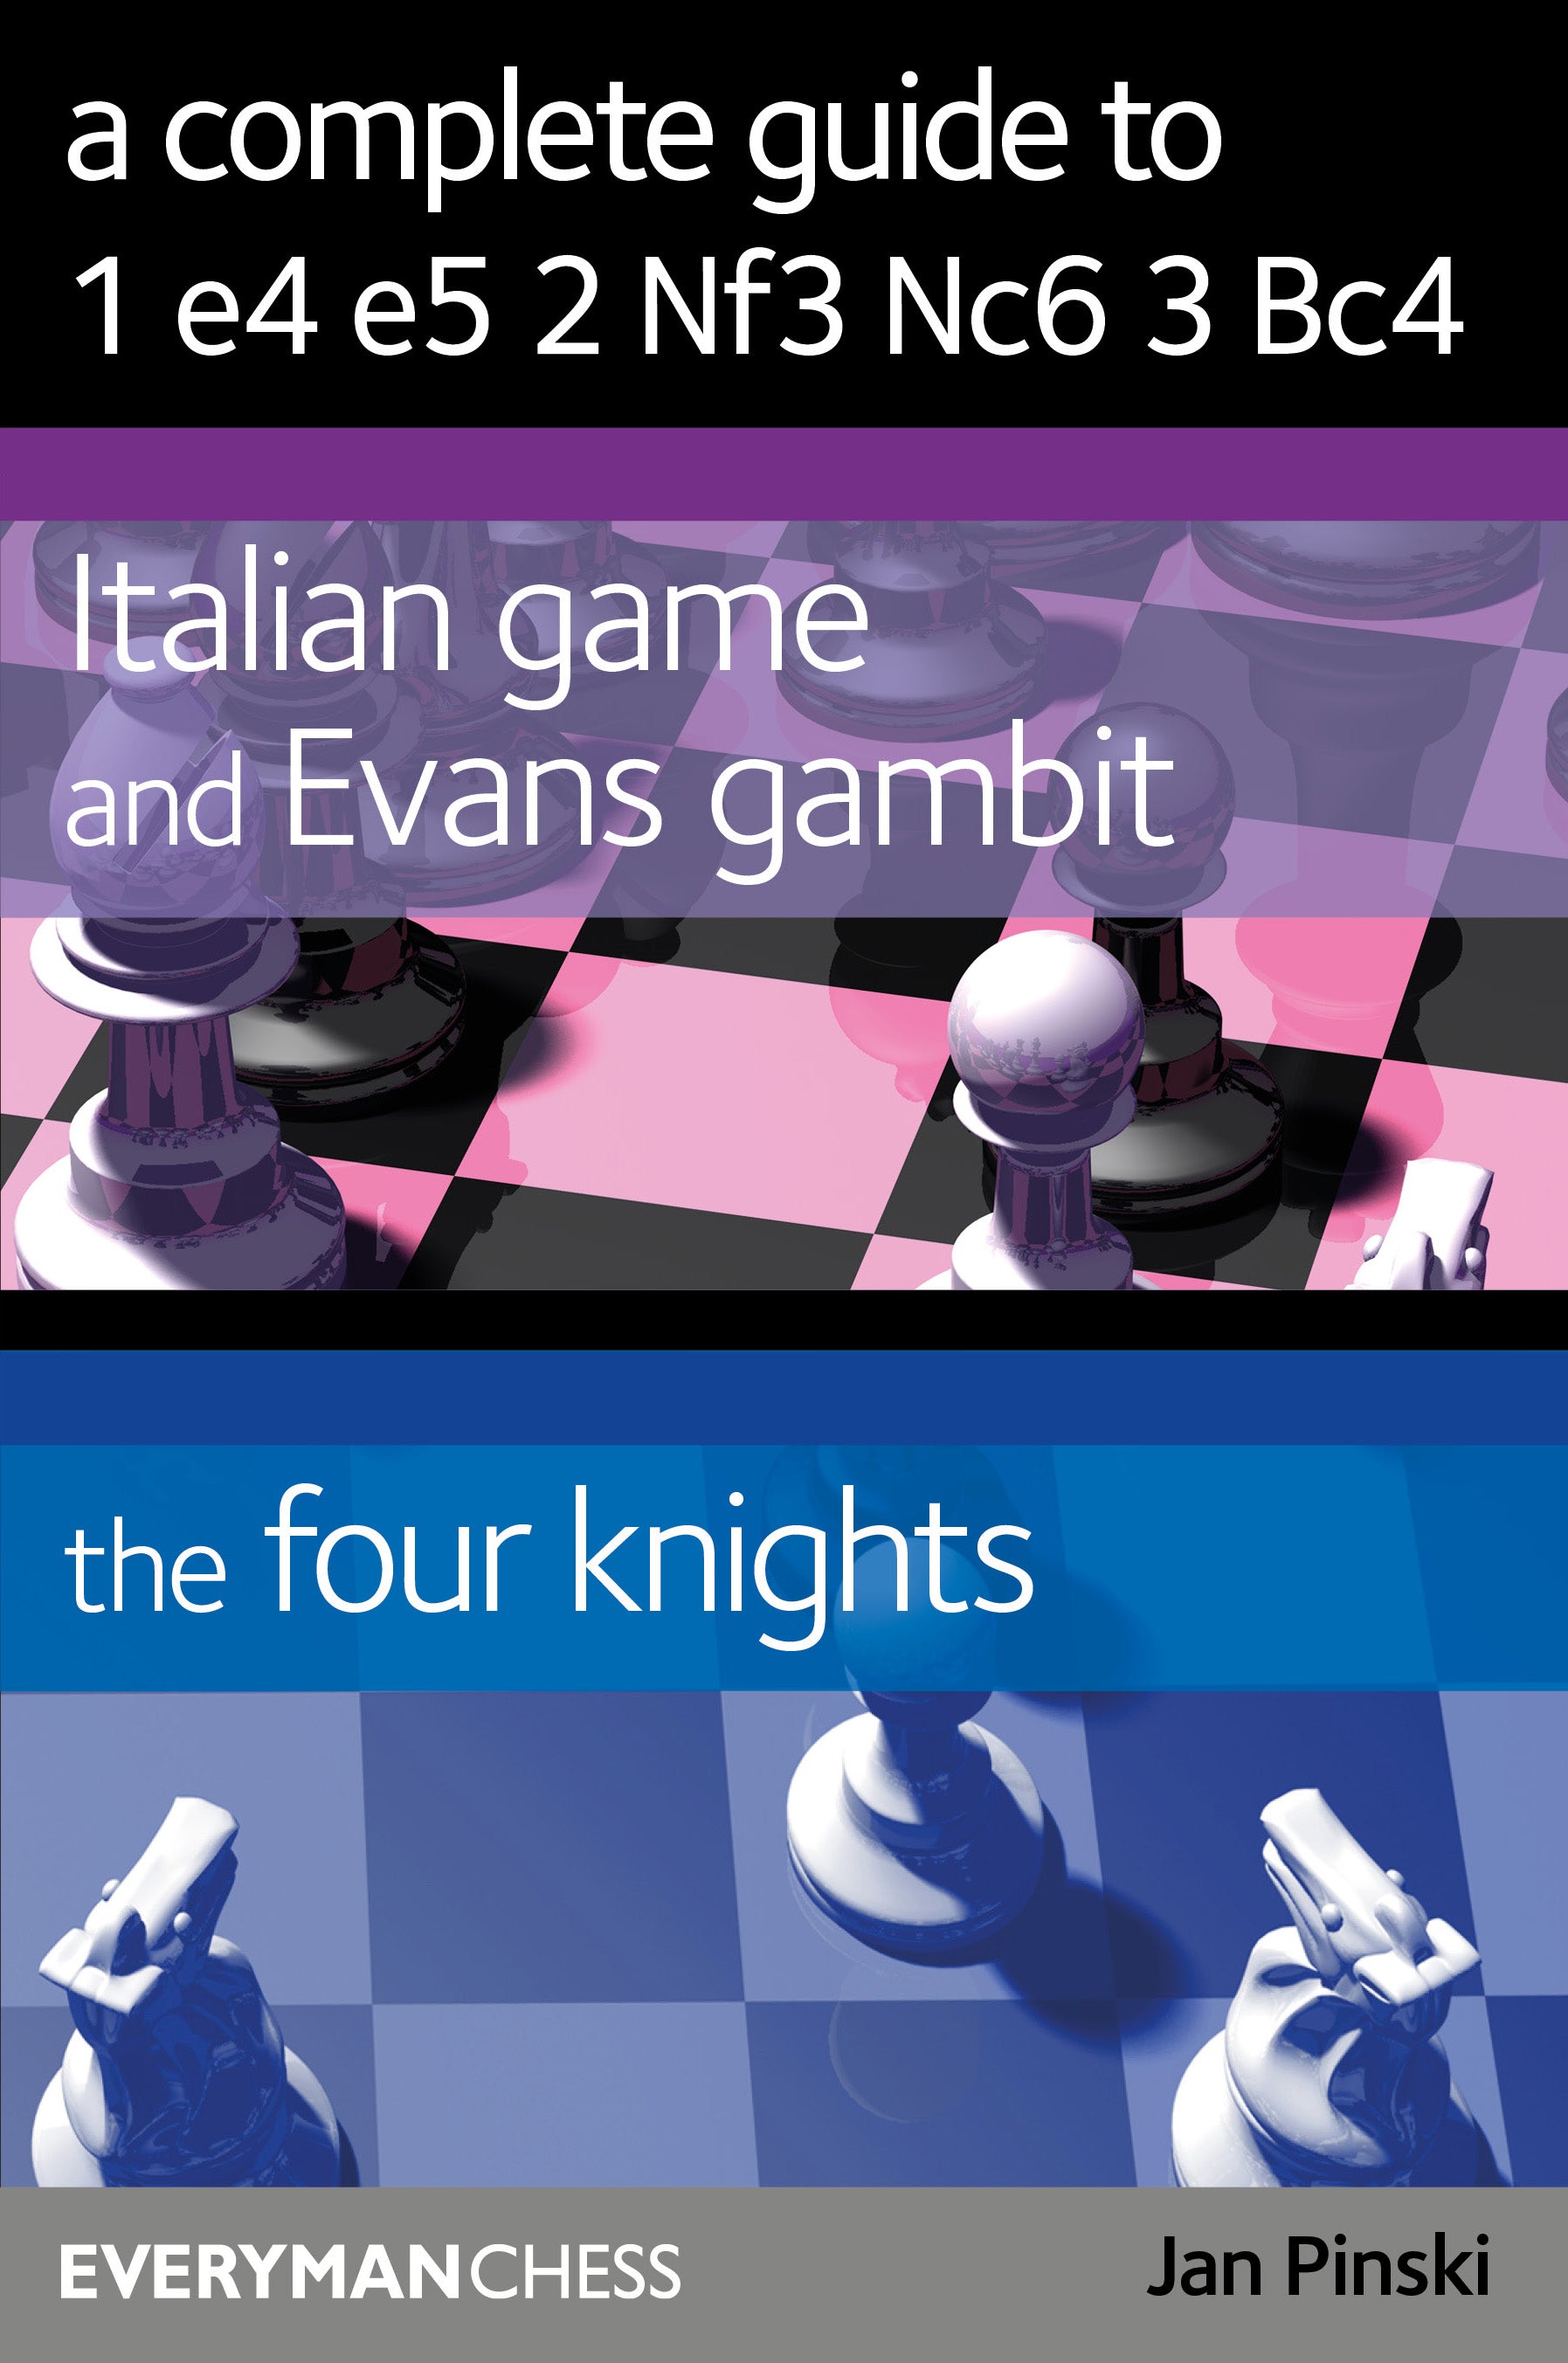 The Italian Gambit System: A Guiding Repertoire For White - E4